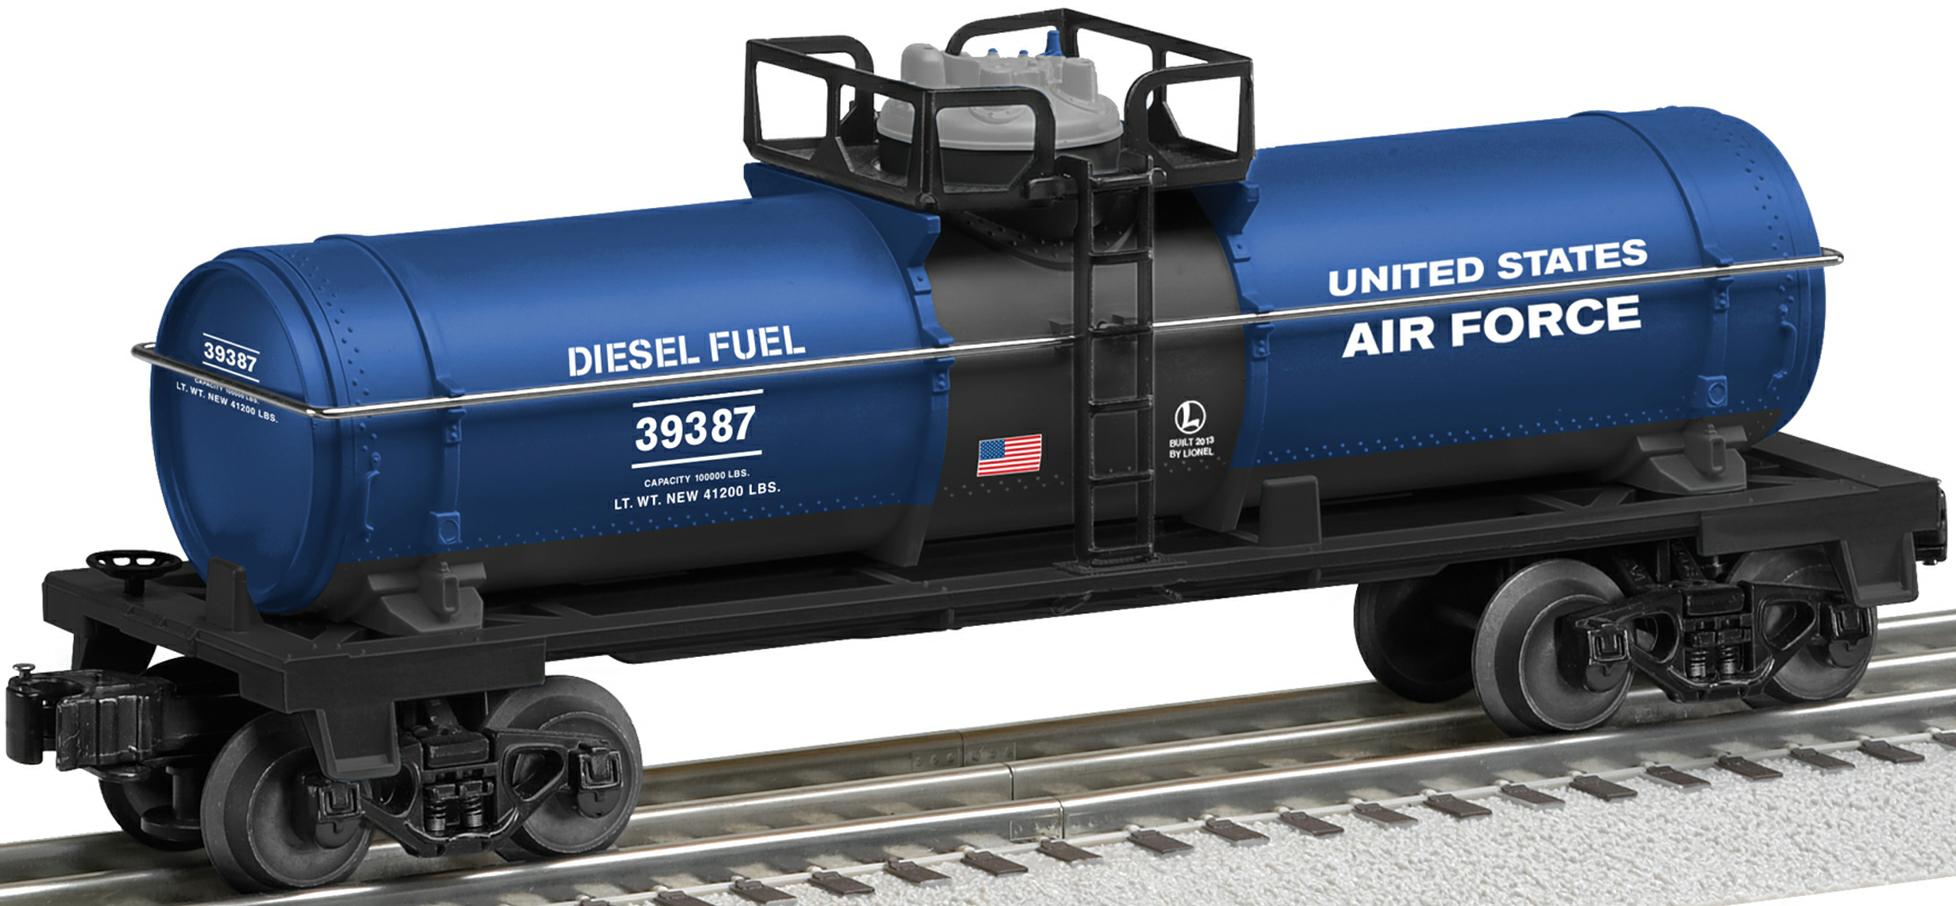 U.S. Air Force Made in USA Tank Car image